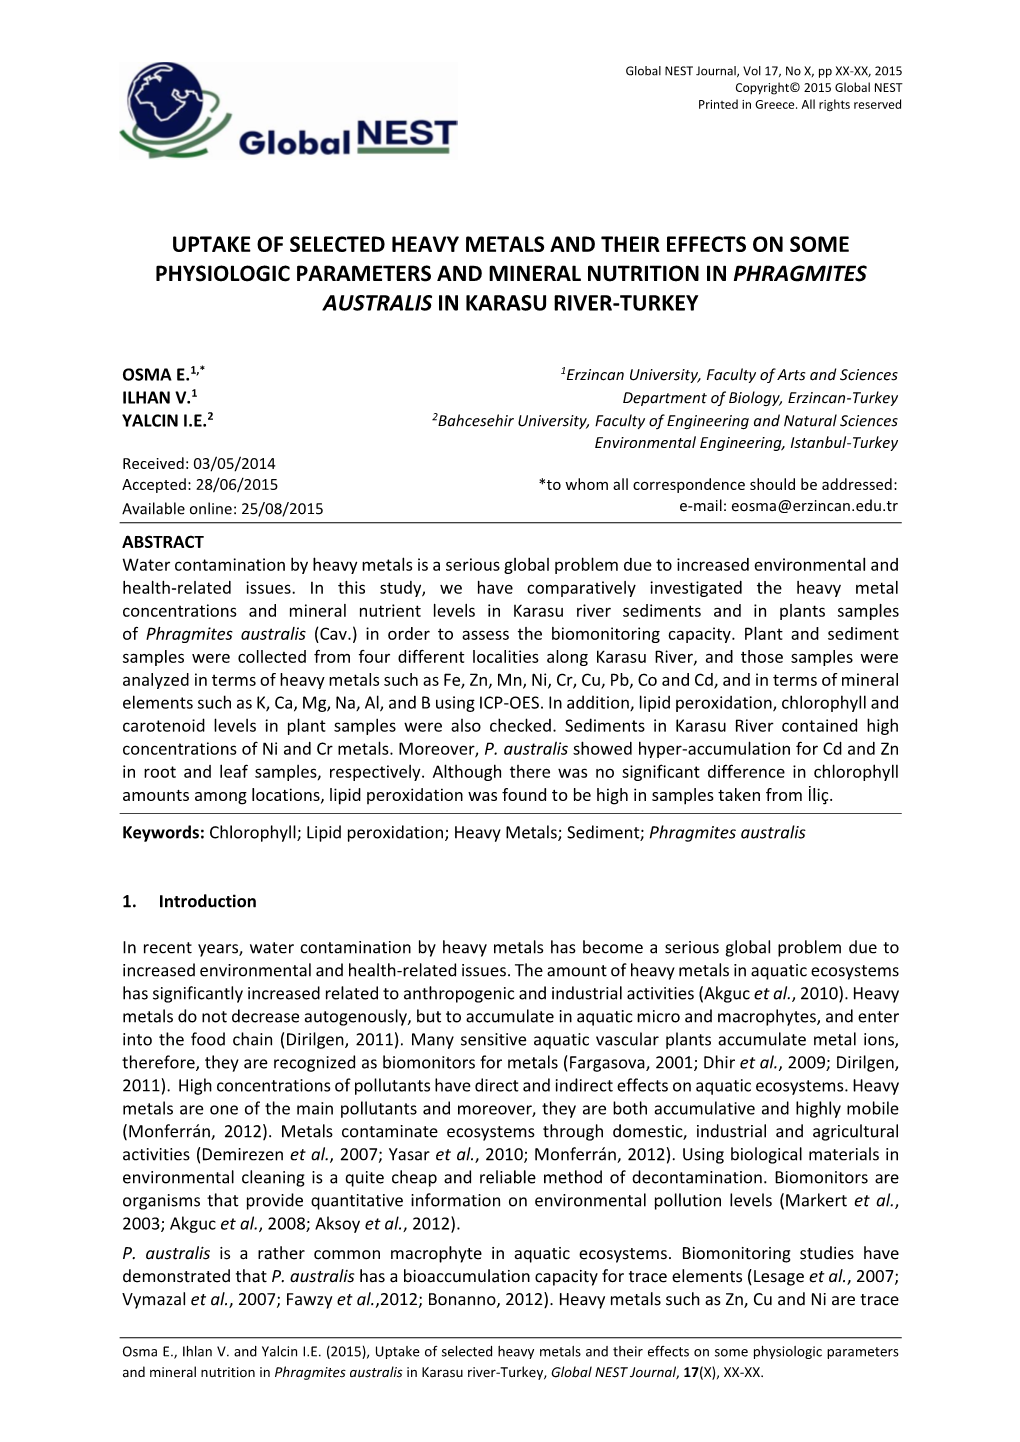 Uptake of Selected Heavy Metals and Their Effects on Some Physiologic Parameters and Mineral Nutrition in Phragmites Australis in Karasu River-Turkey